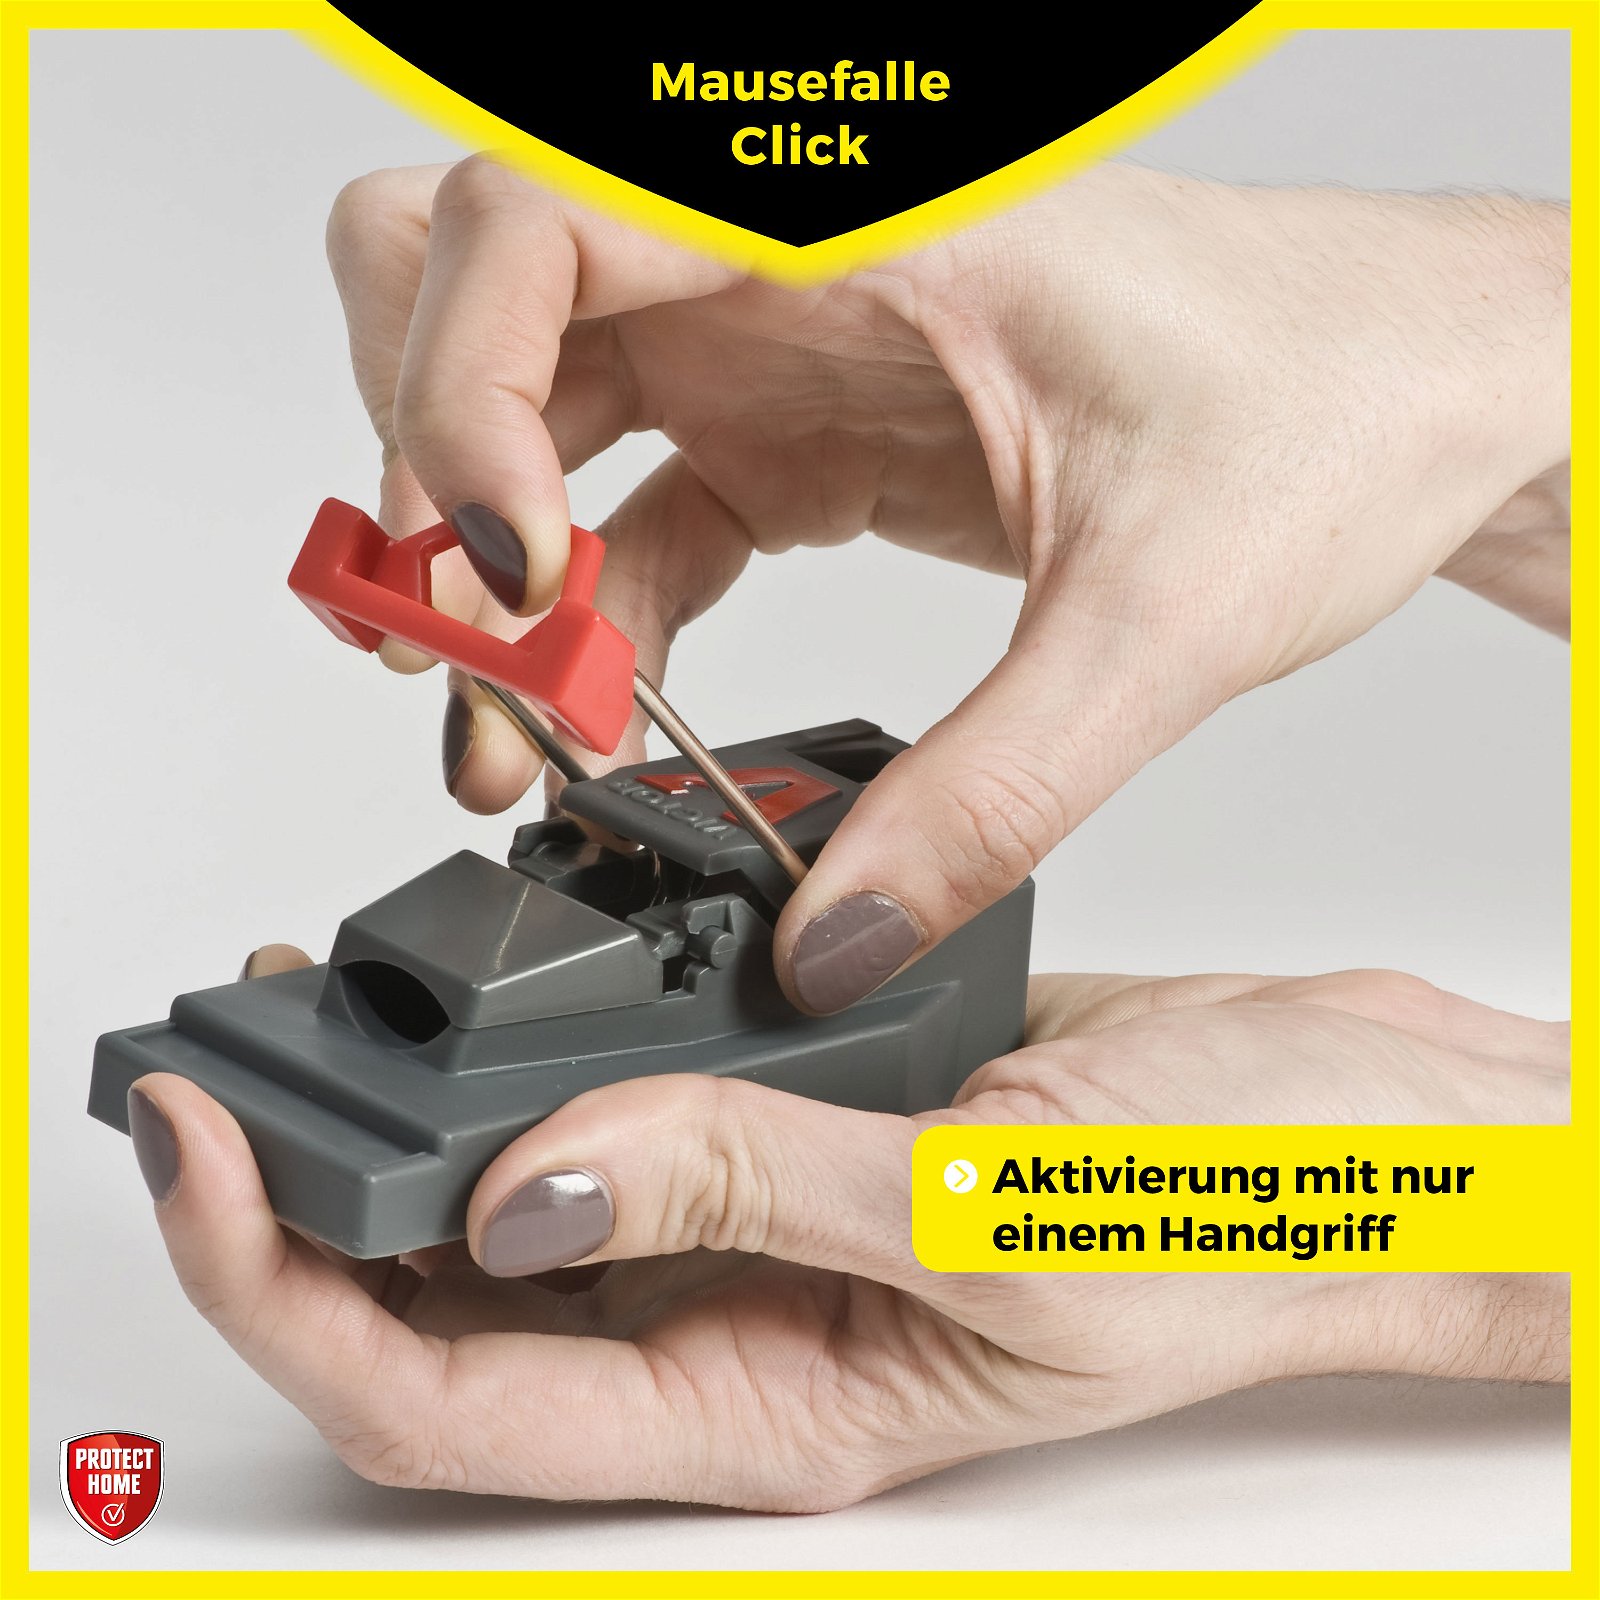 Mausefalle Click, Protect Home, 3 Stück